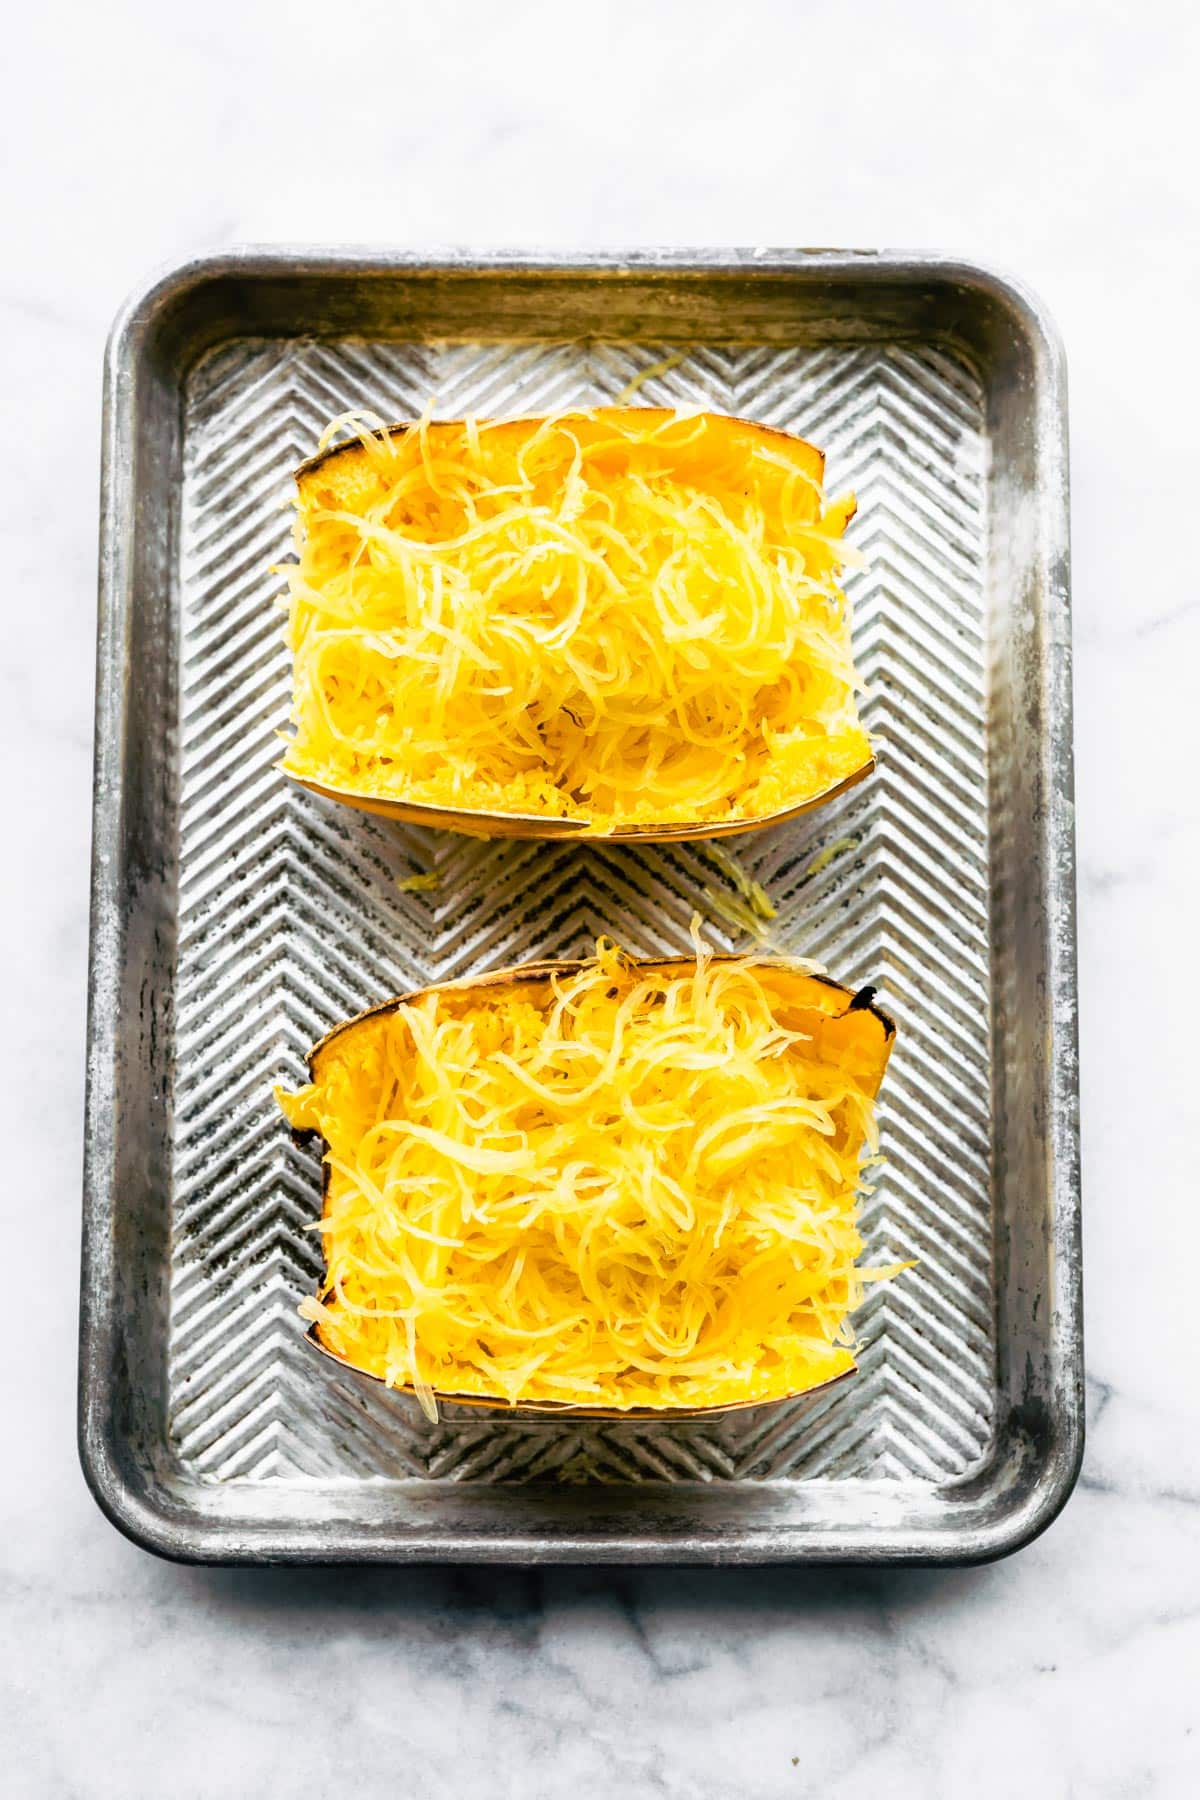 Two spaghetti squash halves filled with spaghetti squash noodles on a baking sheet.